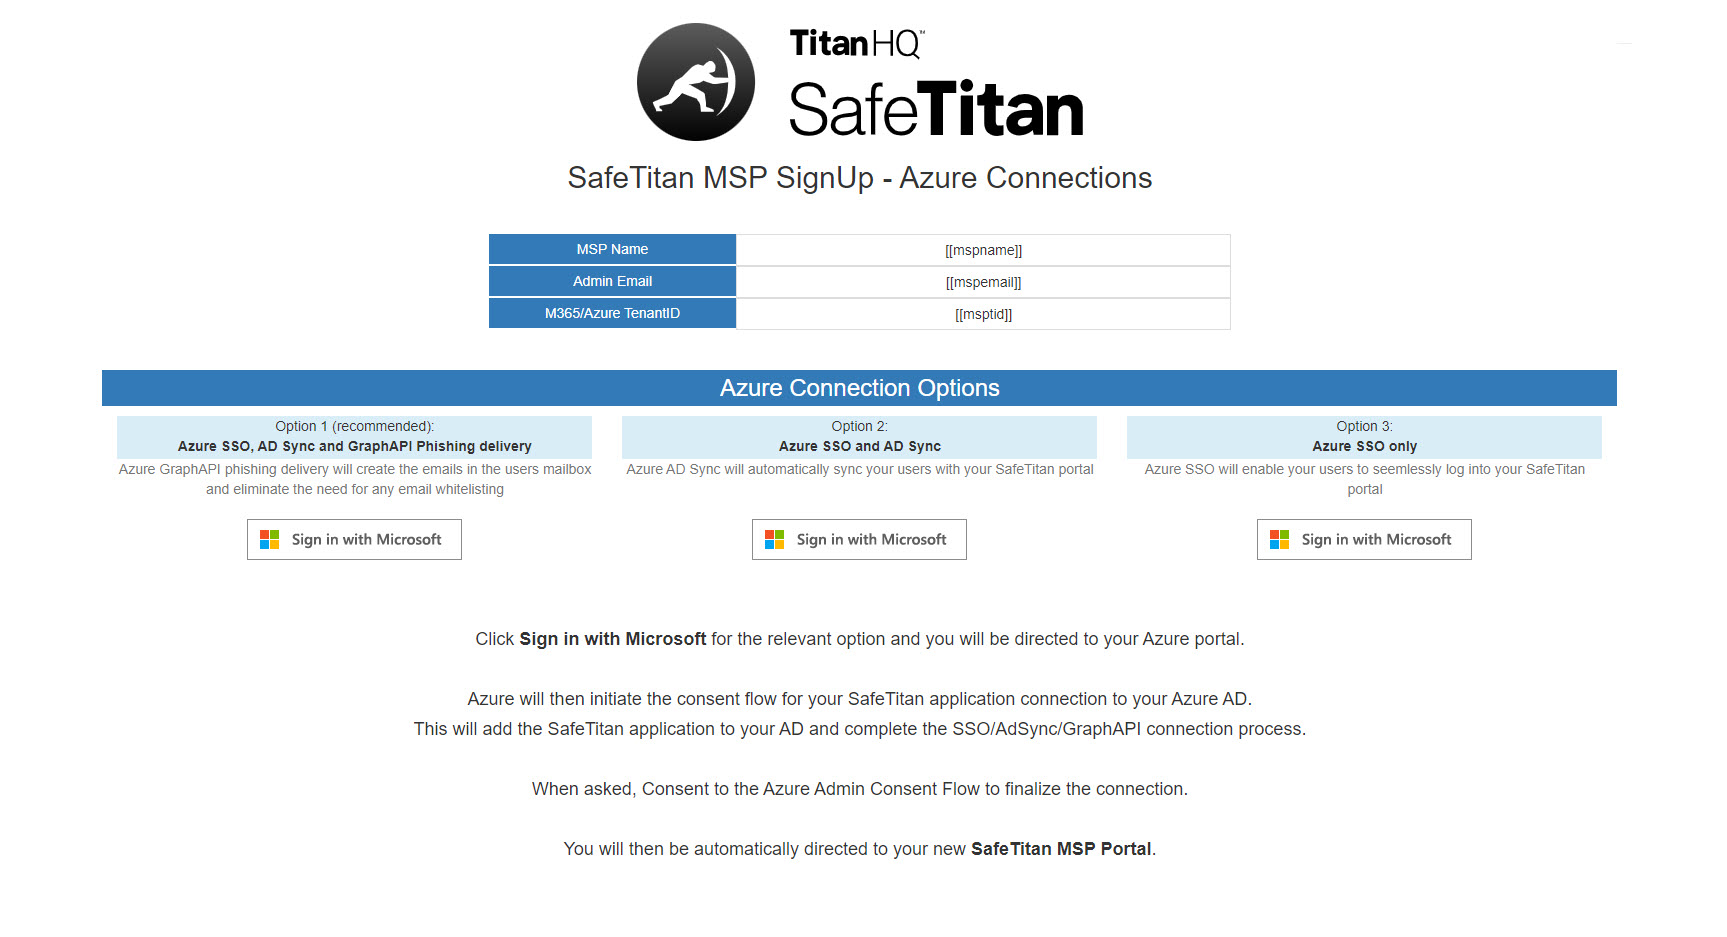 SFT-Welcome-SignUp-Azure-Connections.jpg